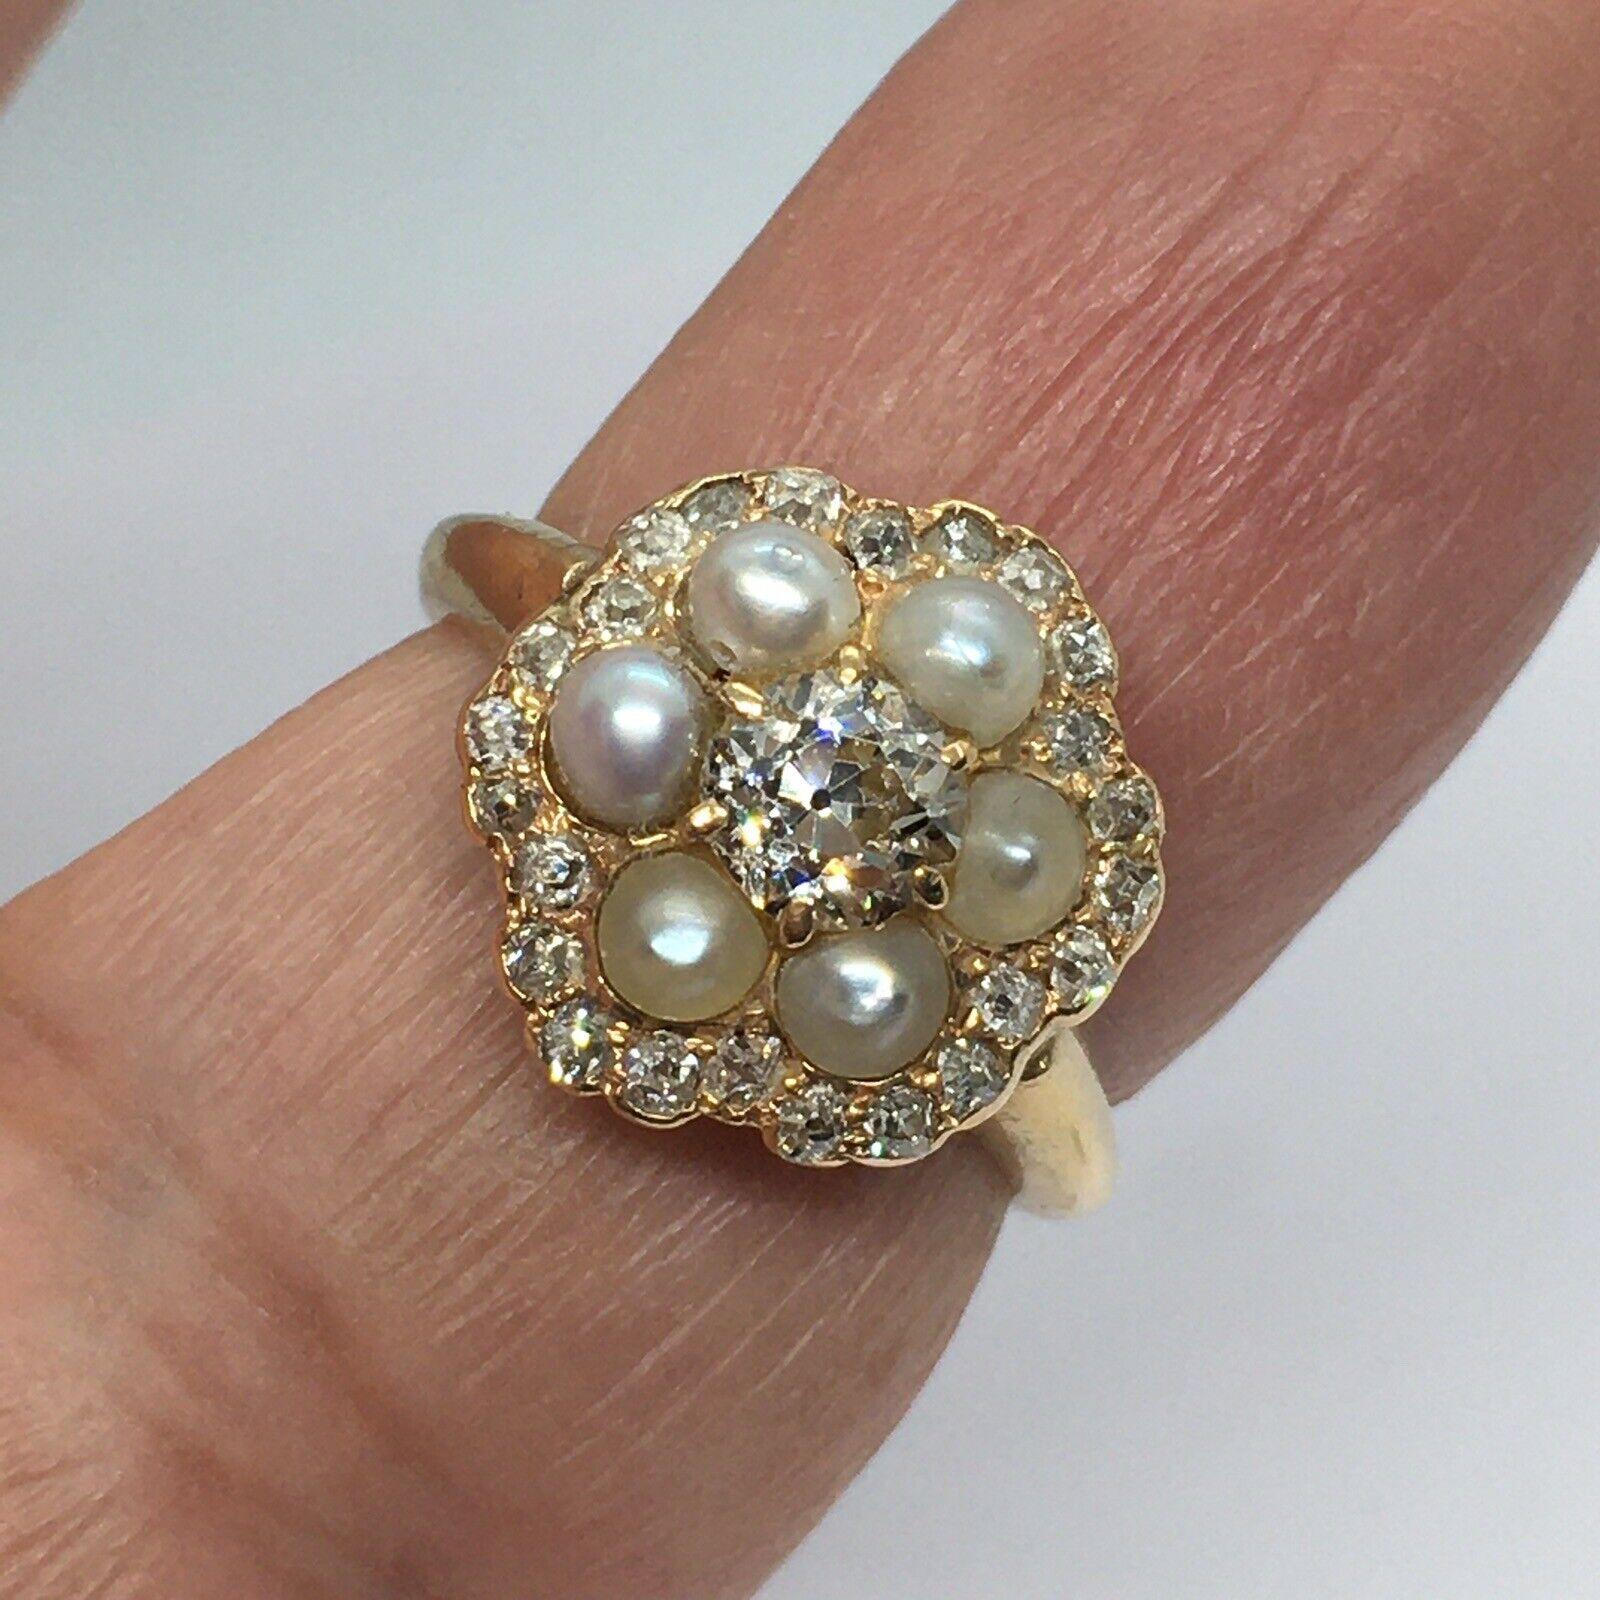 Antique 14K Yellow gold 3/4 Carat Diamond Pearl American Ring Size 6 In Good Condition For Sale In Santa Monica, CA